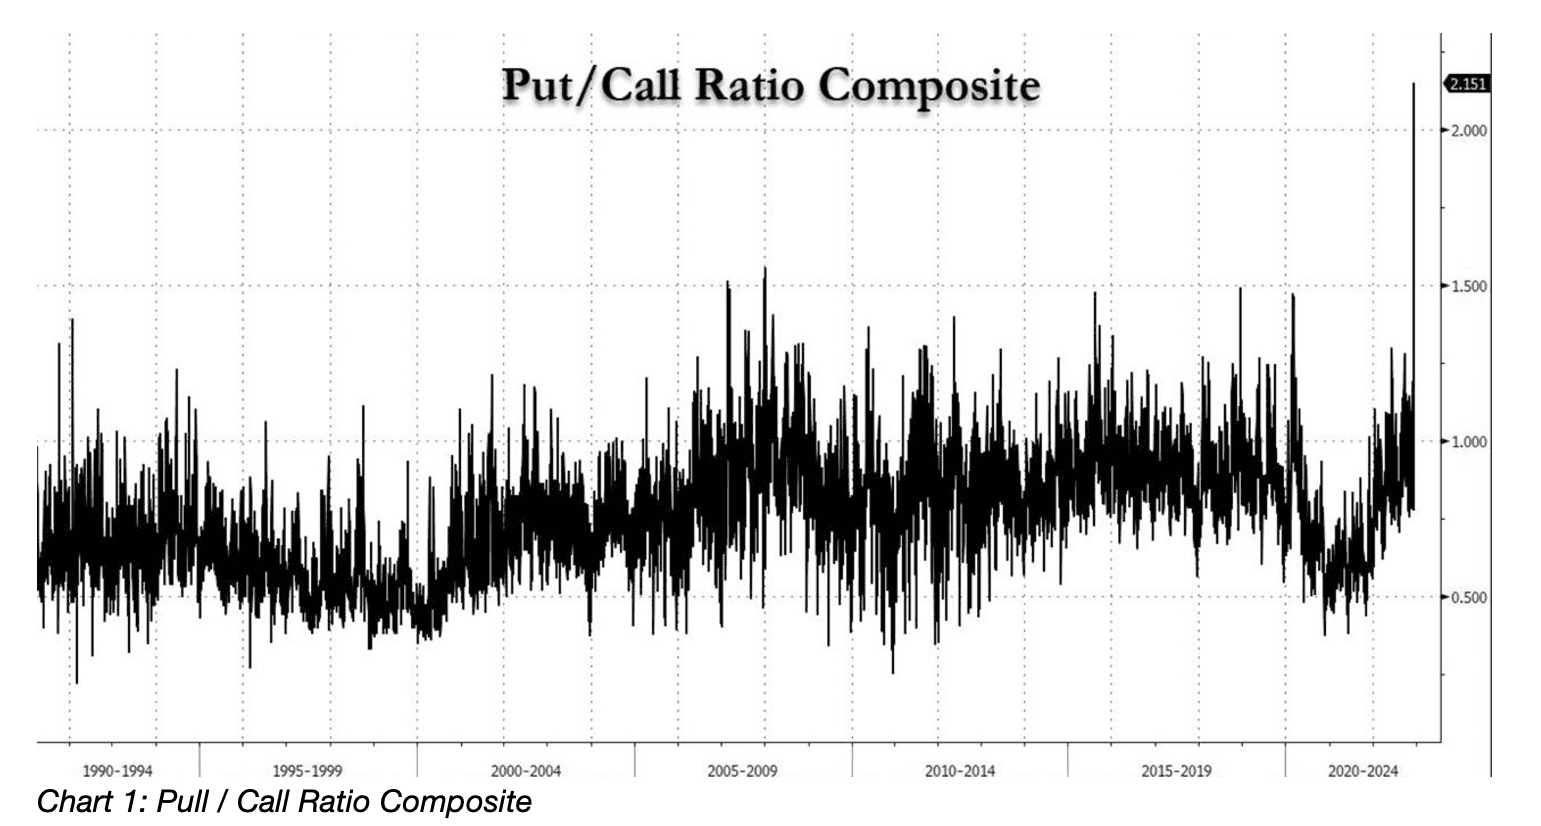 Chart 1: Pull / Call Ratio Composite